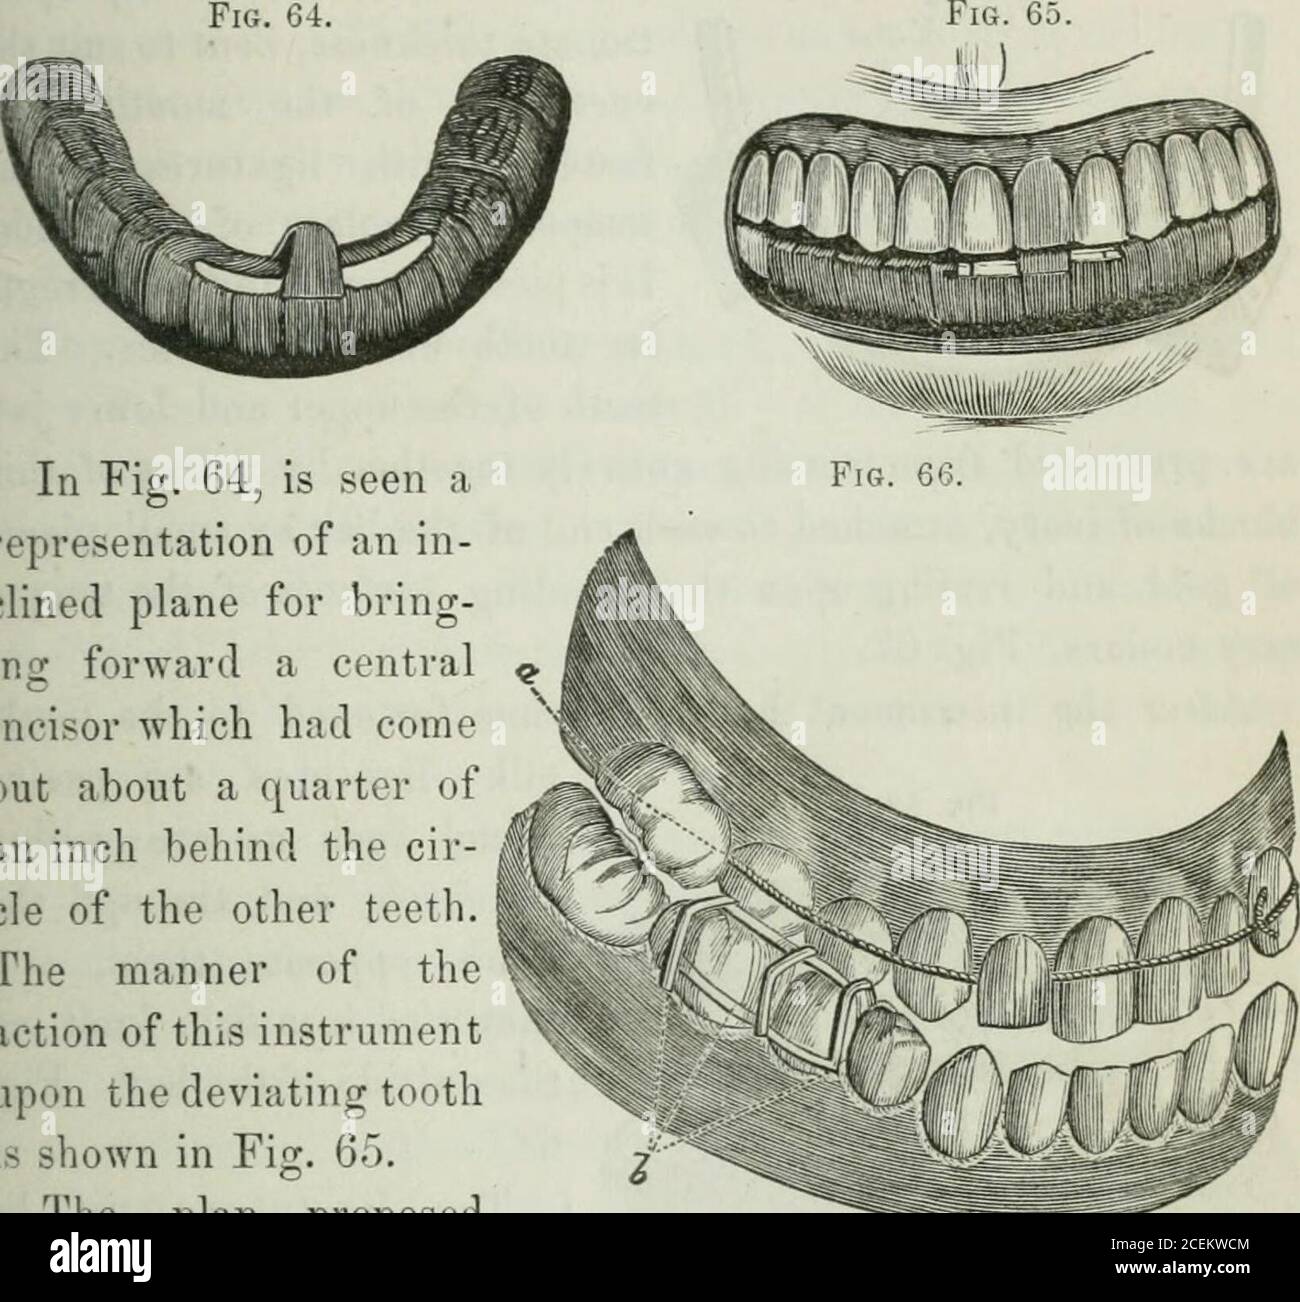 . The principles and practice of dental surgery. TREATMENT OF IRREGULARITY OF THE TEETH. 15 encasing them and the alveohir ridge. An encasement of thissort (Fig. 64), possesses greater stability than can he obtainedfor an appliance like the one represented in Figs. 62 and 63. Fig. 64.. In Fig. 64, is seen arepresentation of an in-clined plane for bring-ing forward a centralincisor which had comeout about a quarter ofan inch behind the cir-cle of the other teeth.The manner of theaction of this instrumentupon the deviating toothis shown in Fig. 65. The plan proposedby Delabarre, as shown in Fig. Stock Photo